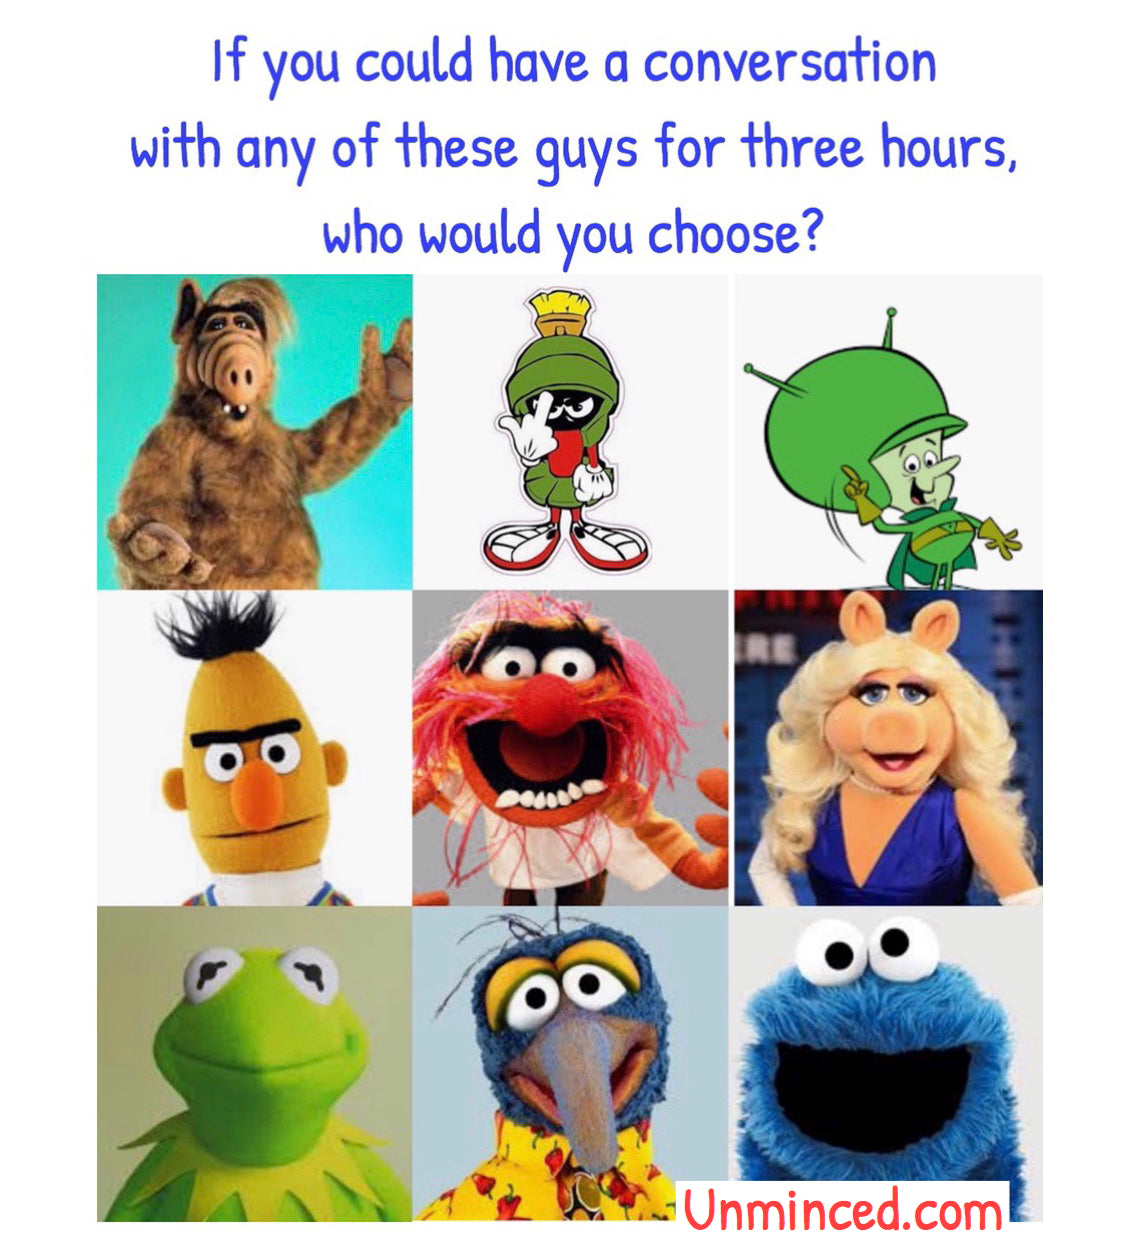 Who Would You Choose?